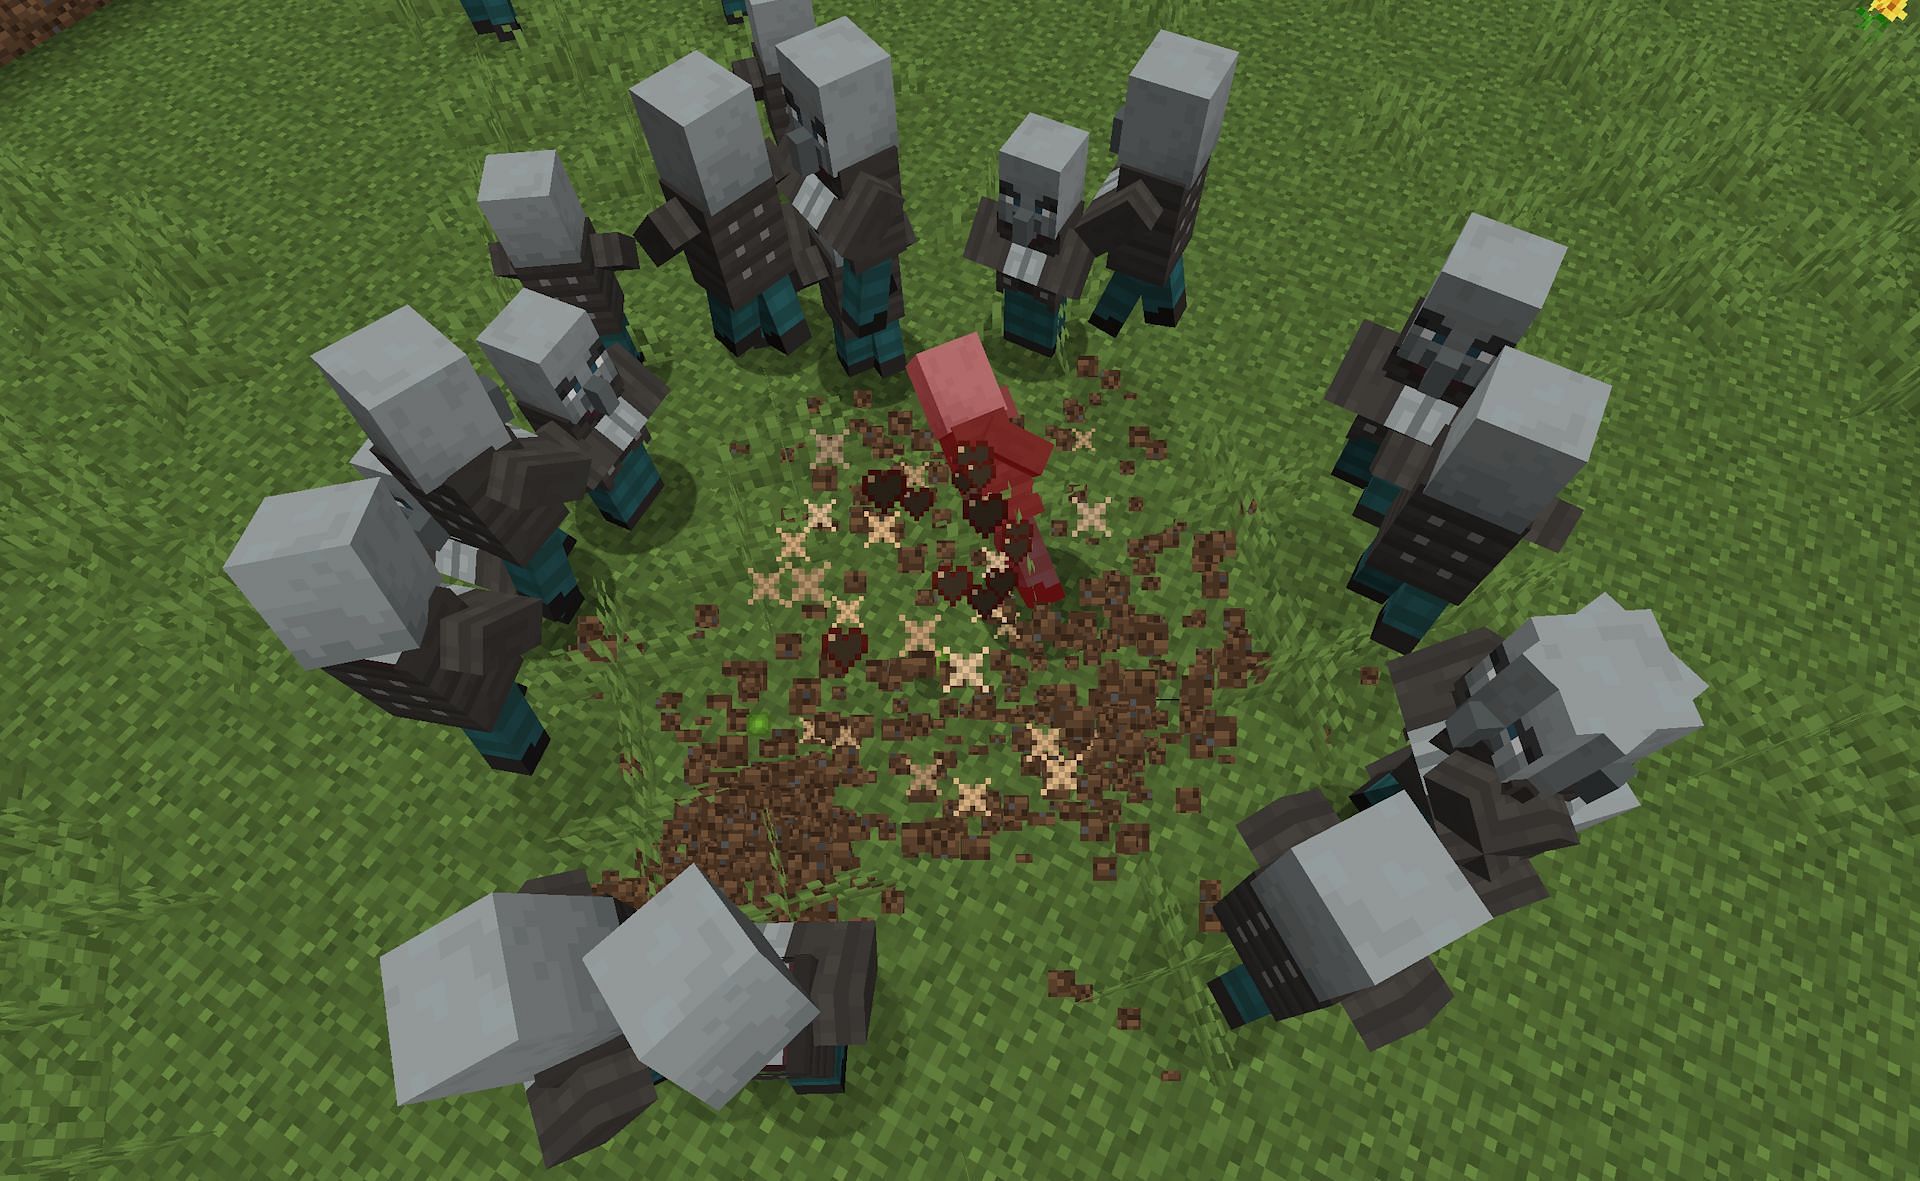 The mace is sure to become a survival staple (Image via Mojang)